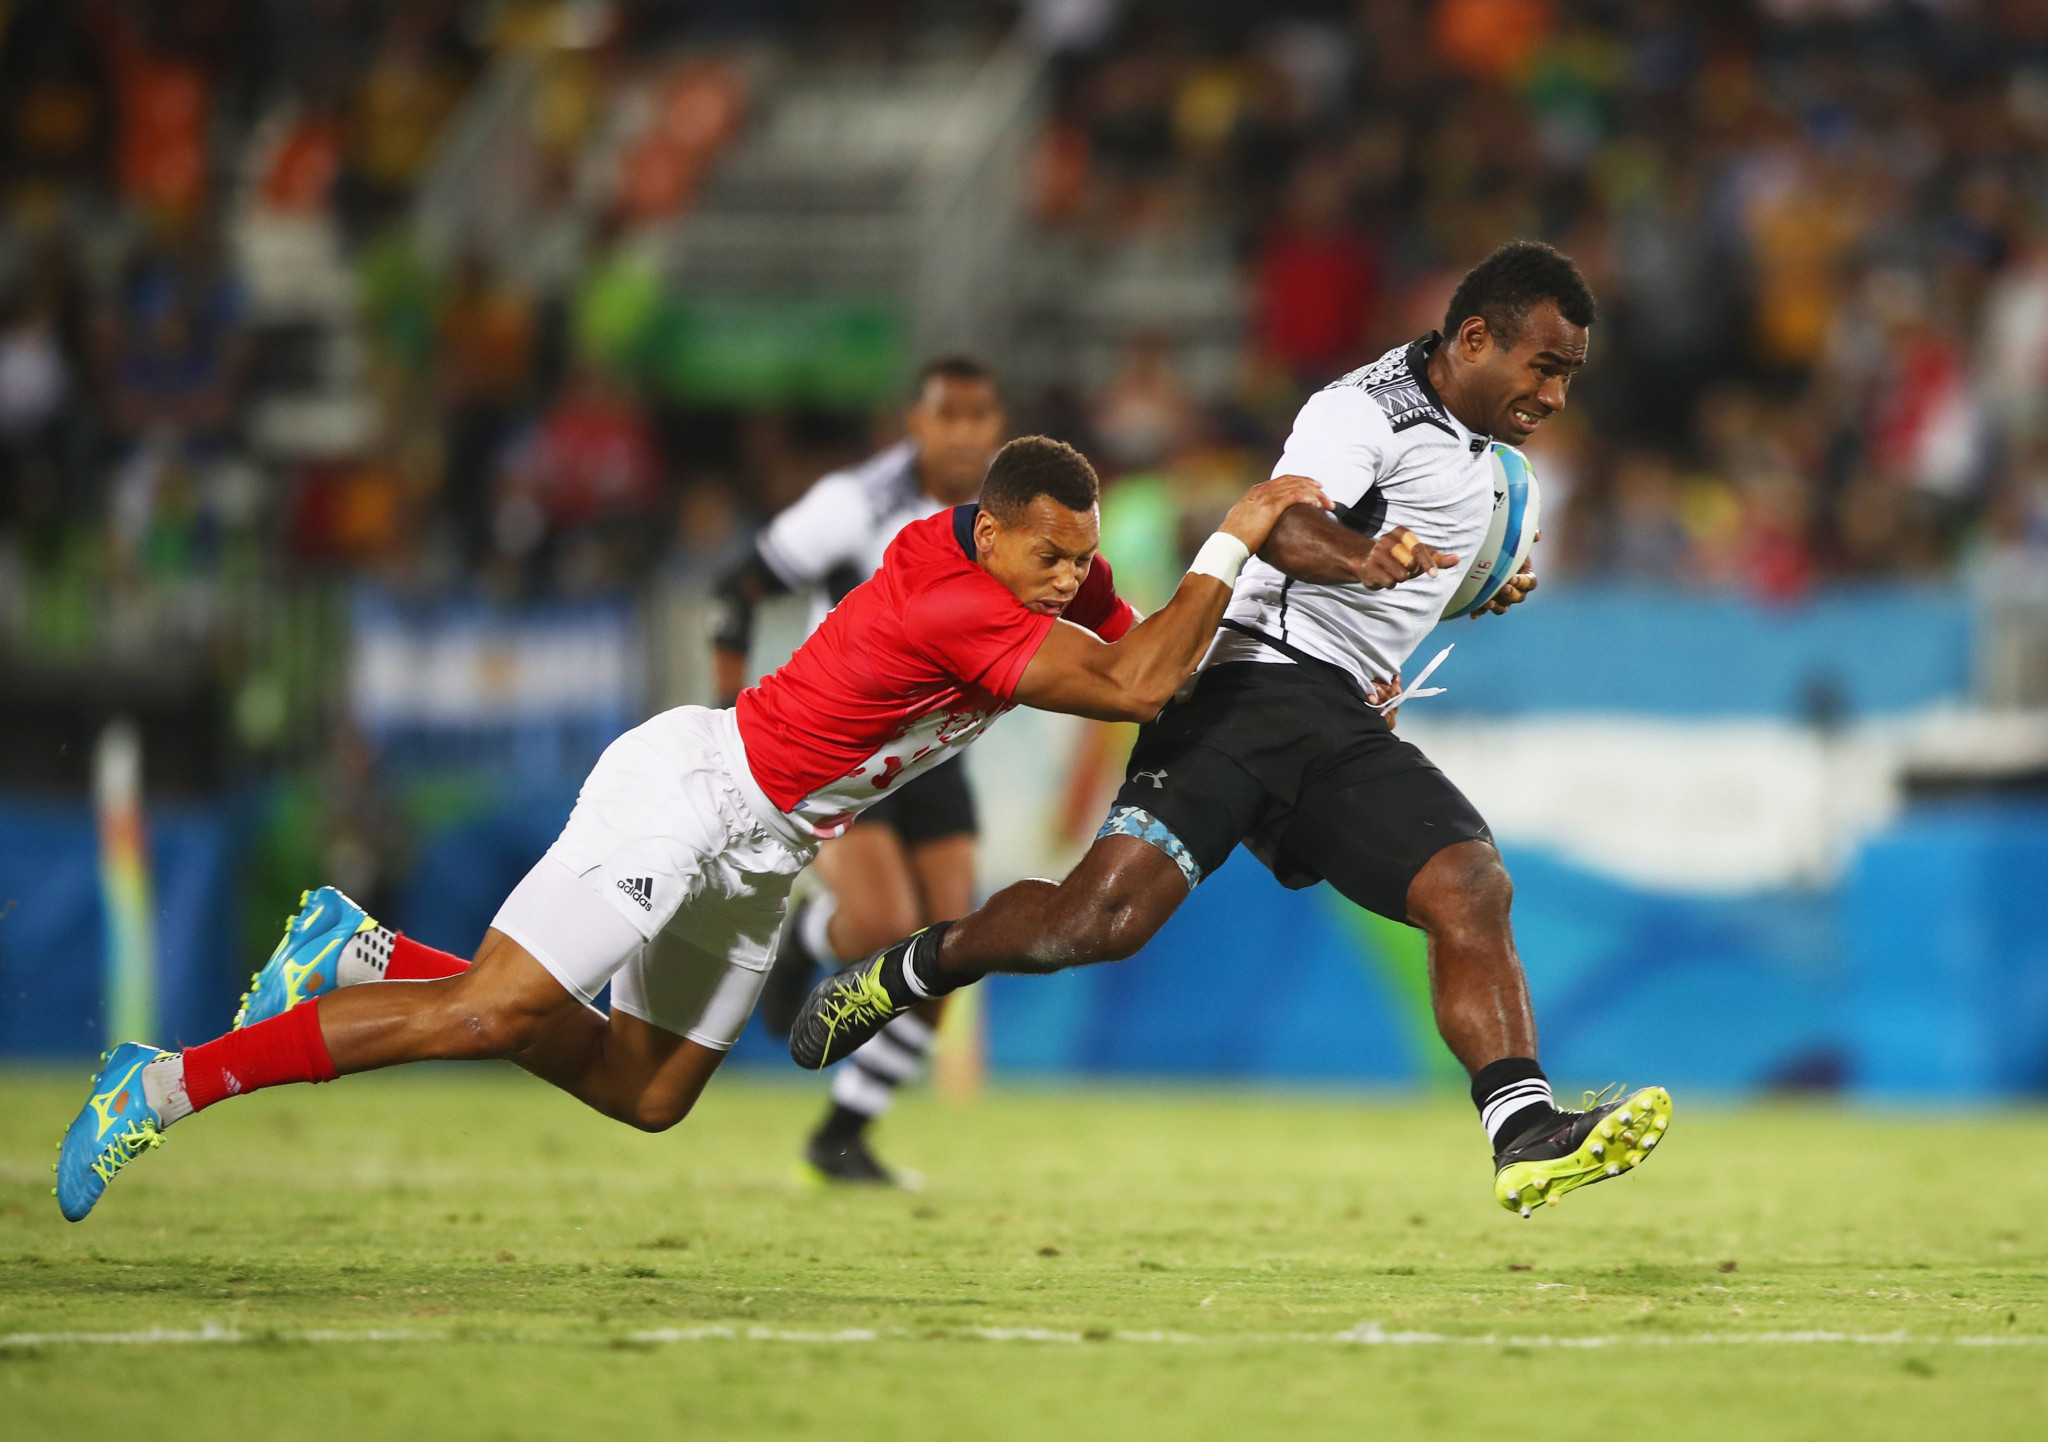 Rugby sevens made a successful debut on the Olympic programme at Rio 2016 ©Getty Images